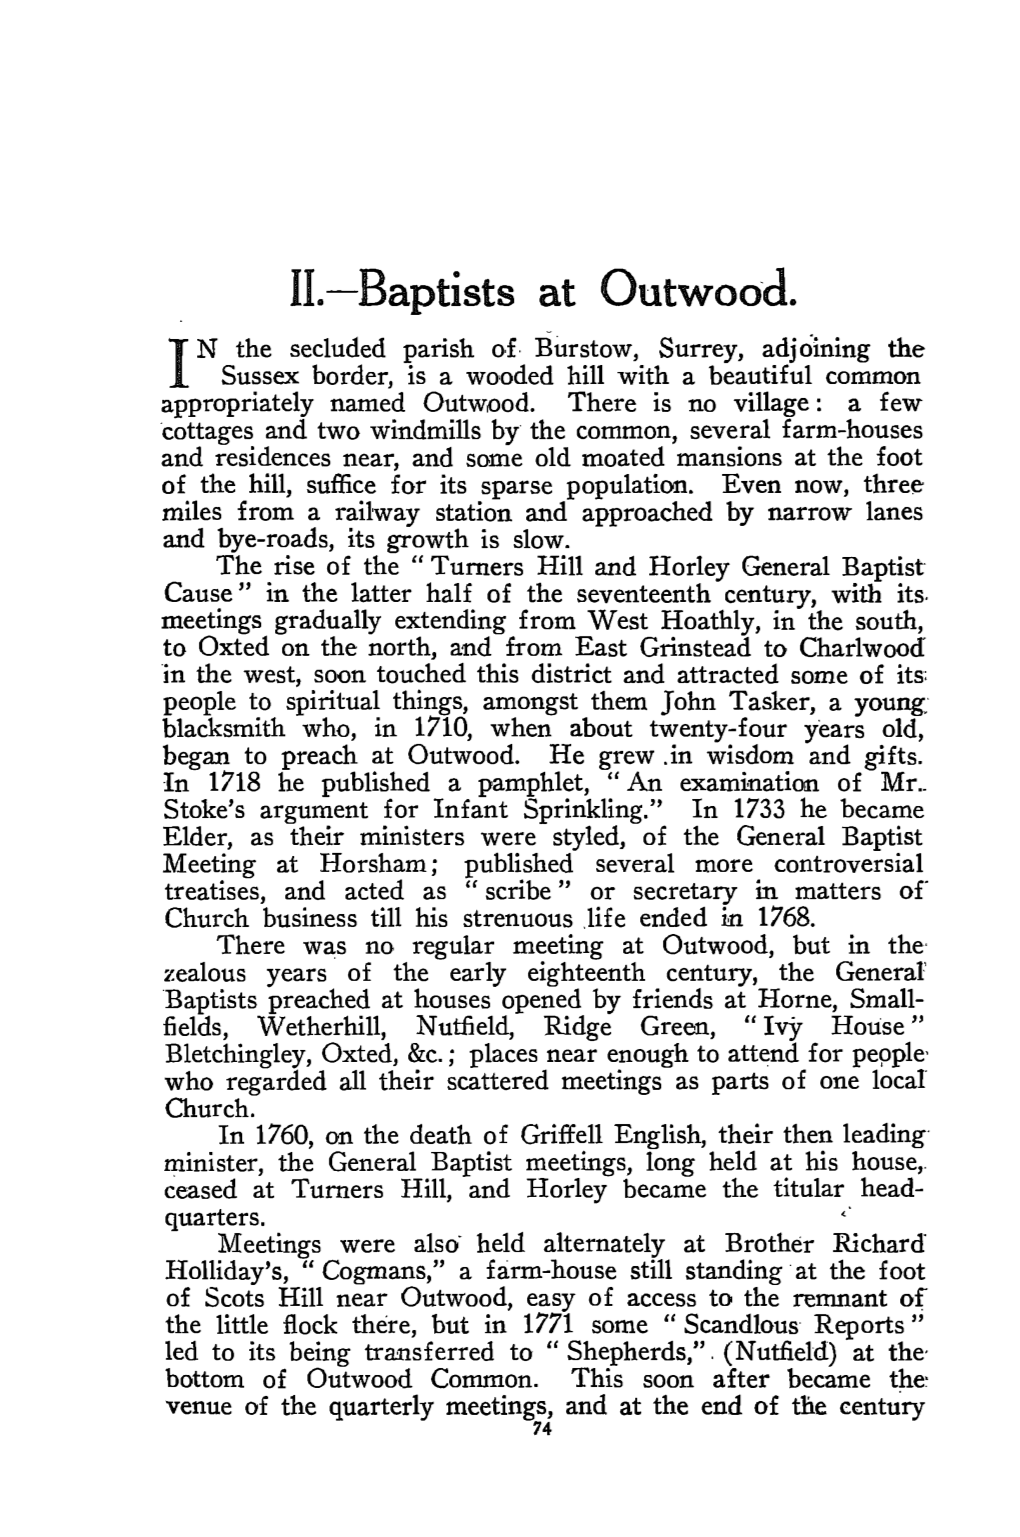 General Baptists in Surrey and Sussex. II. Baptists at Outwood